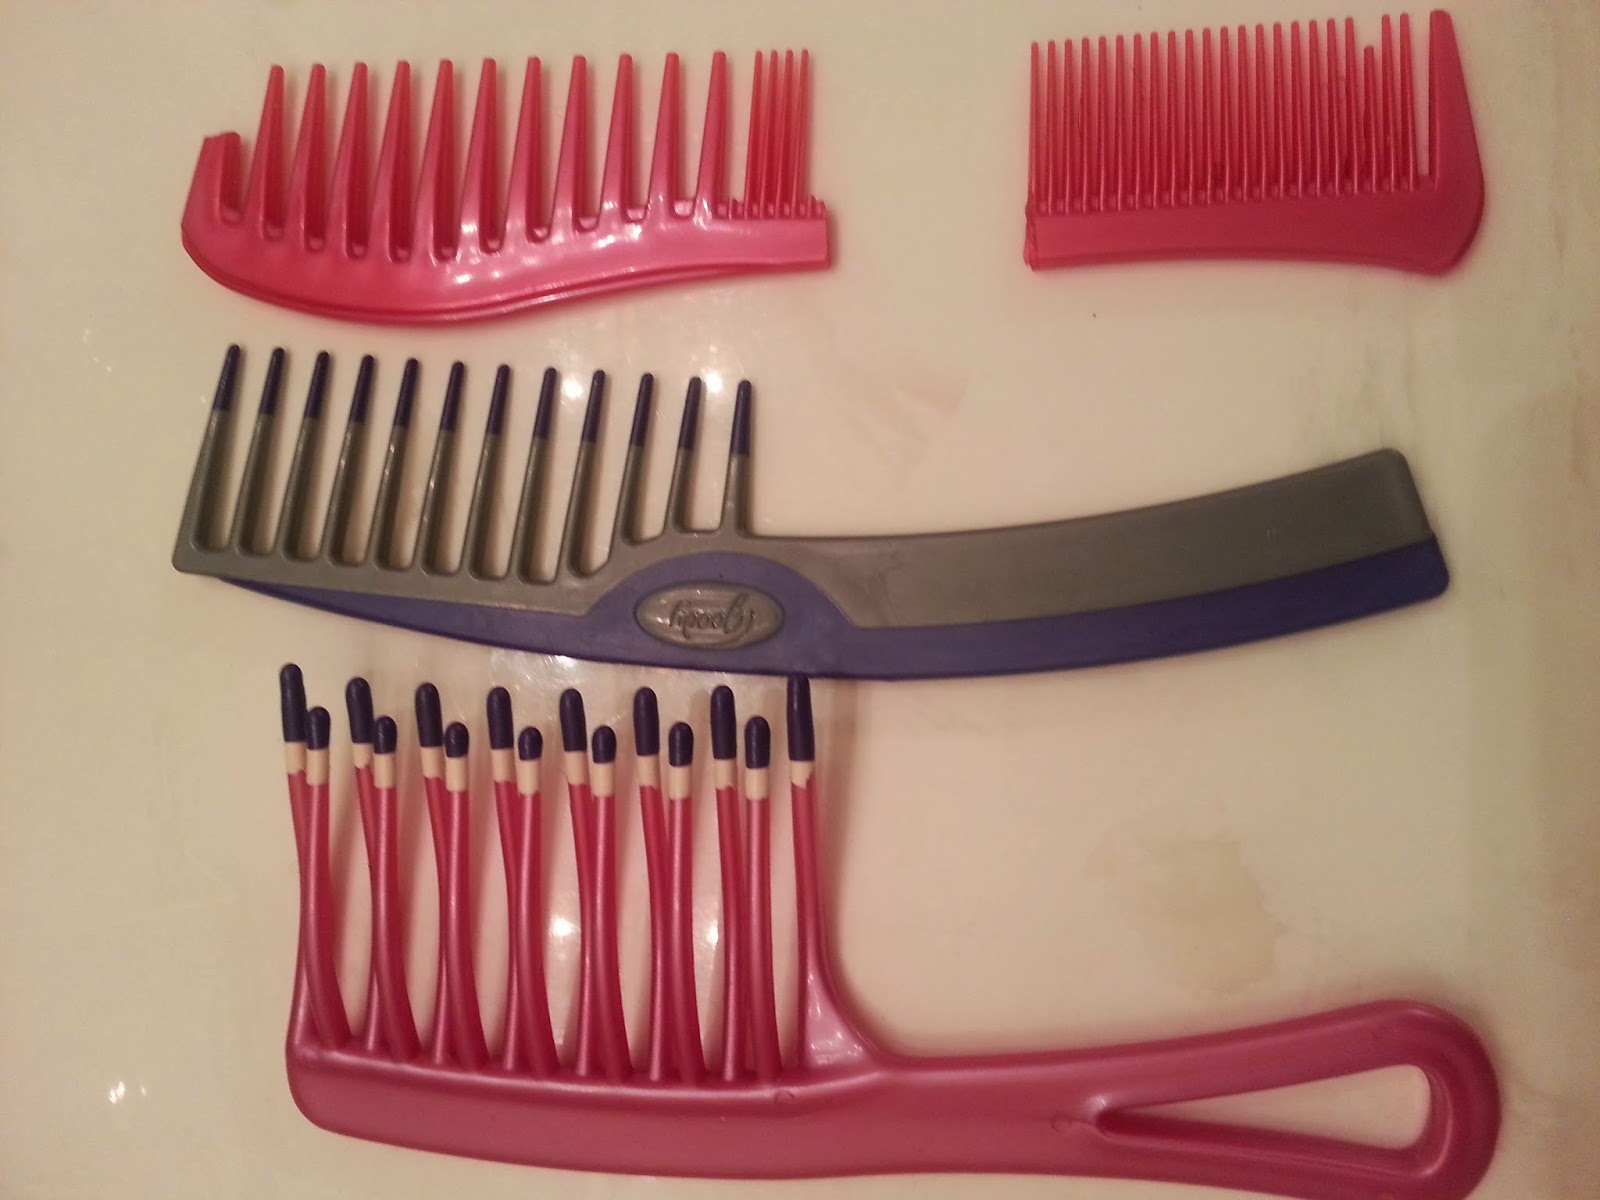 Give Me 5 Minutes with Fanuppa!: Great Comb Makes a Difference